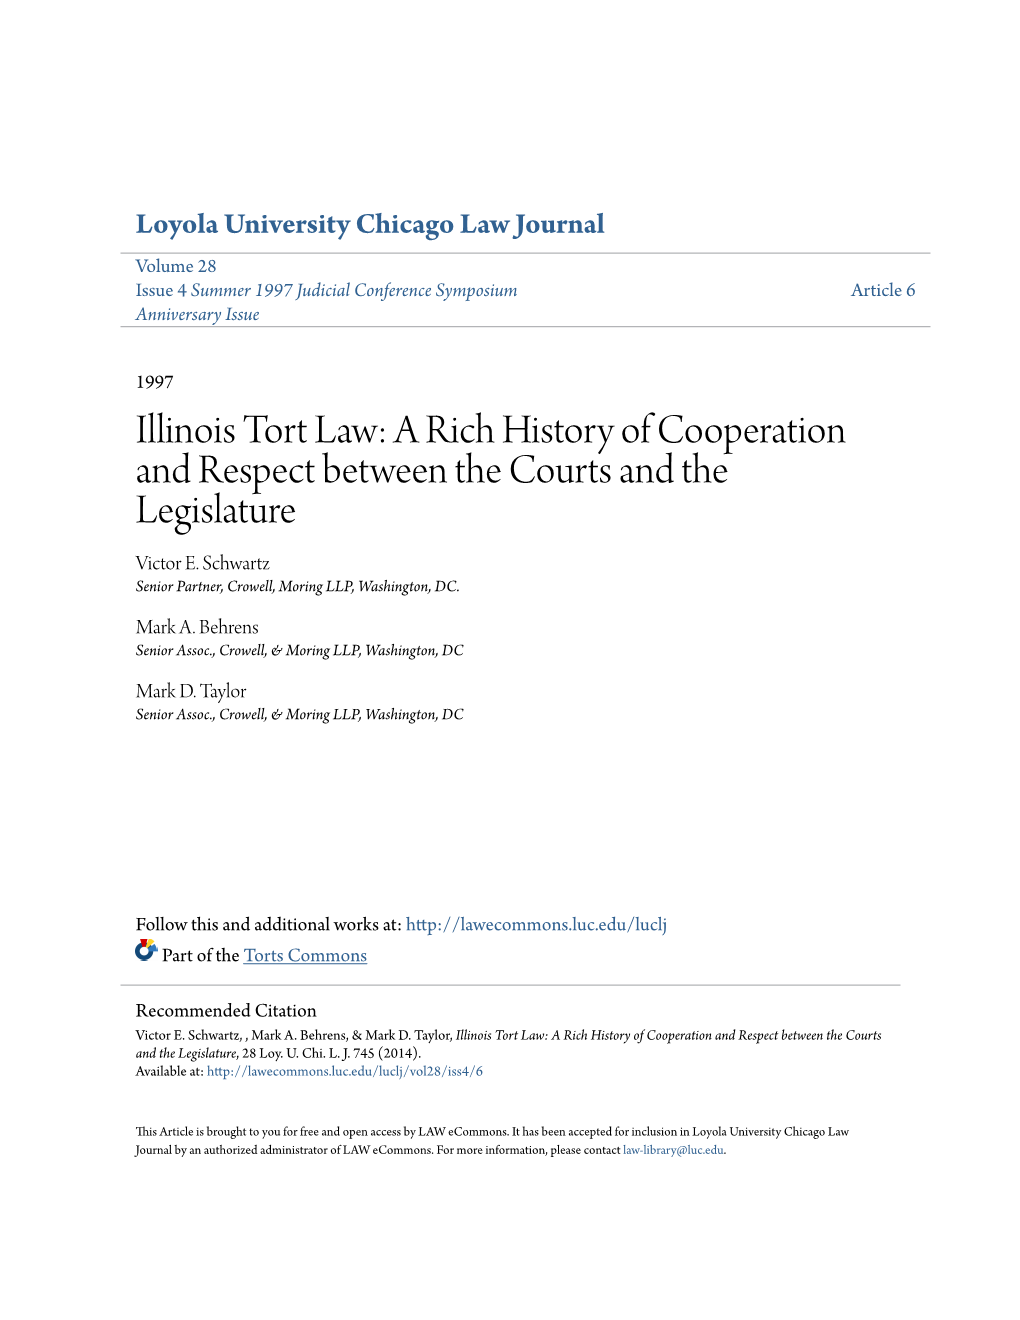 Illinois Tort Law: a Rich History of Cooperation and Respect Between the Courts and the Legislature Victor E